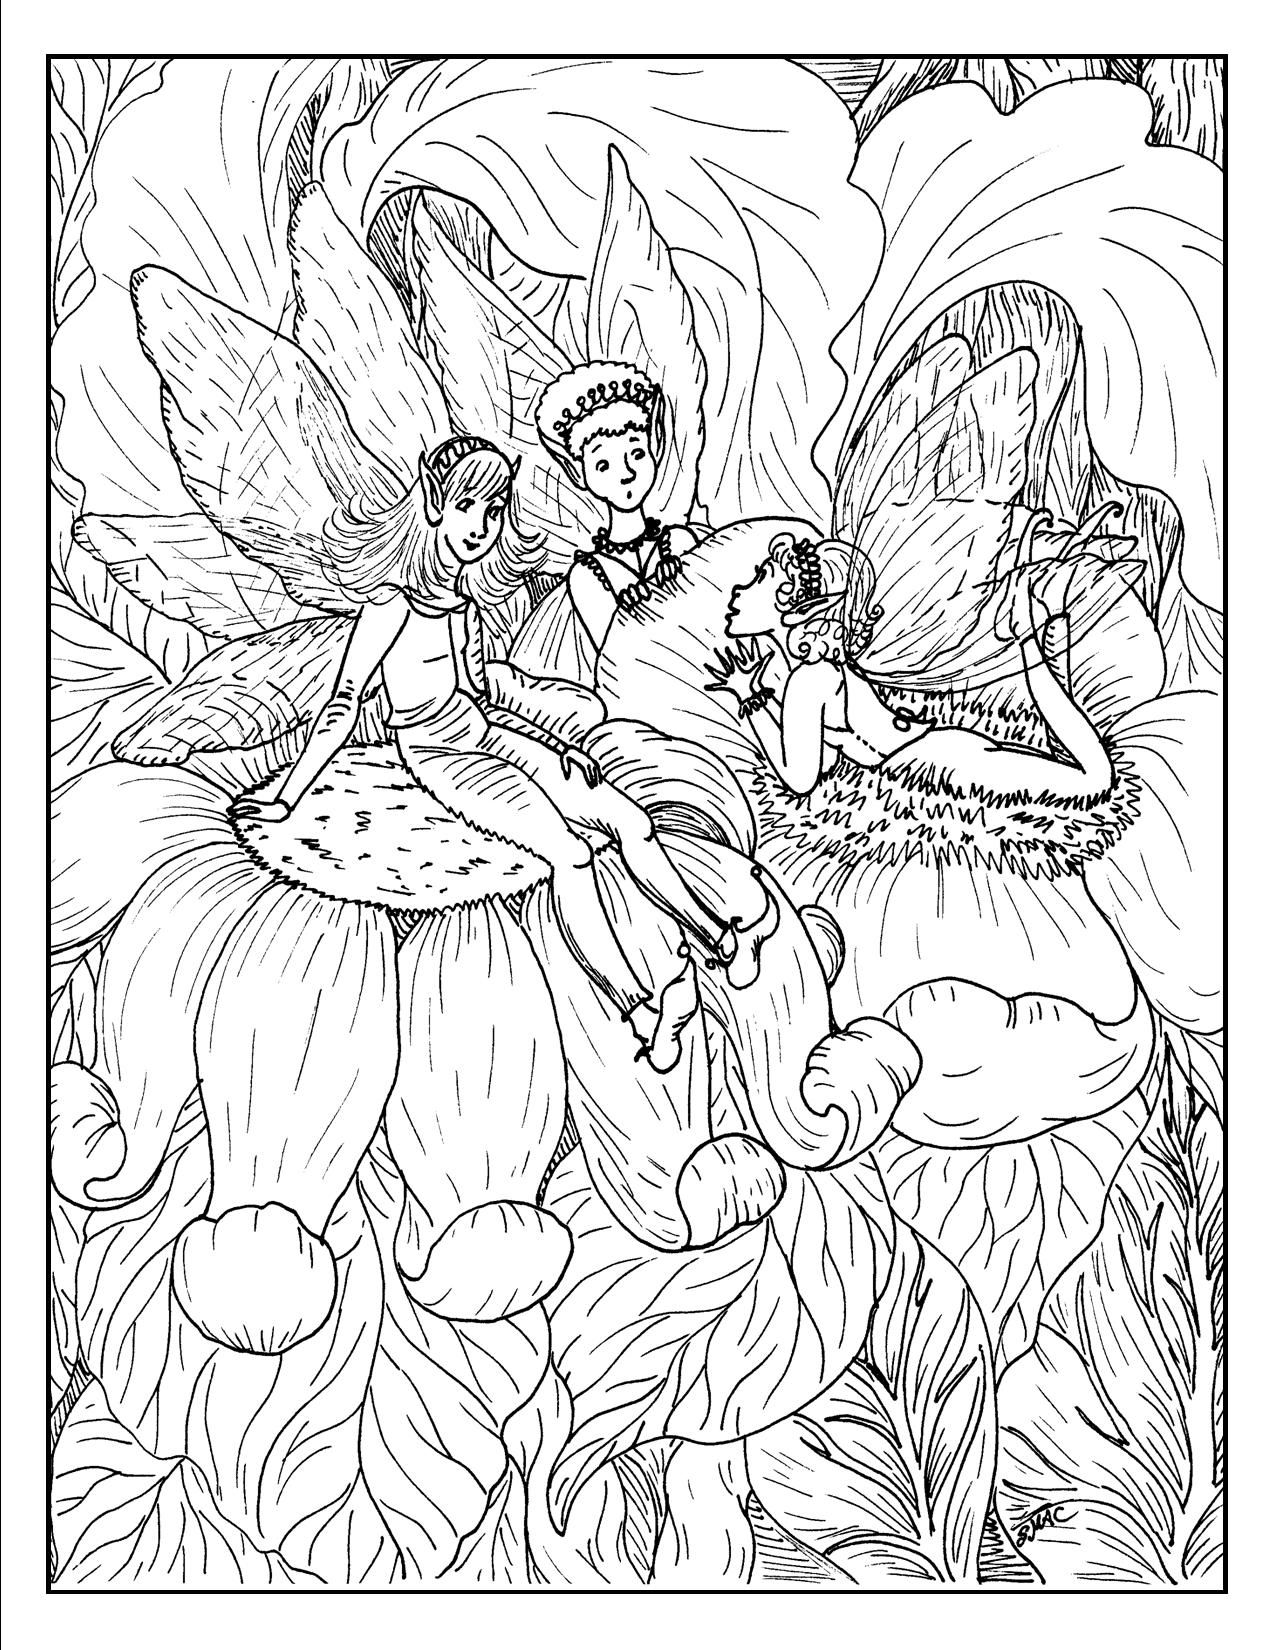 Detailed Fairy Adults Coloring Page. 